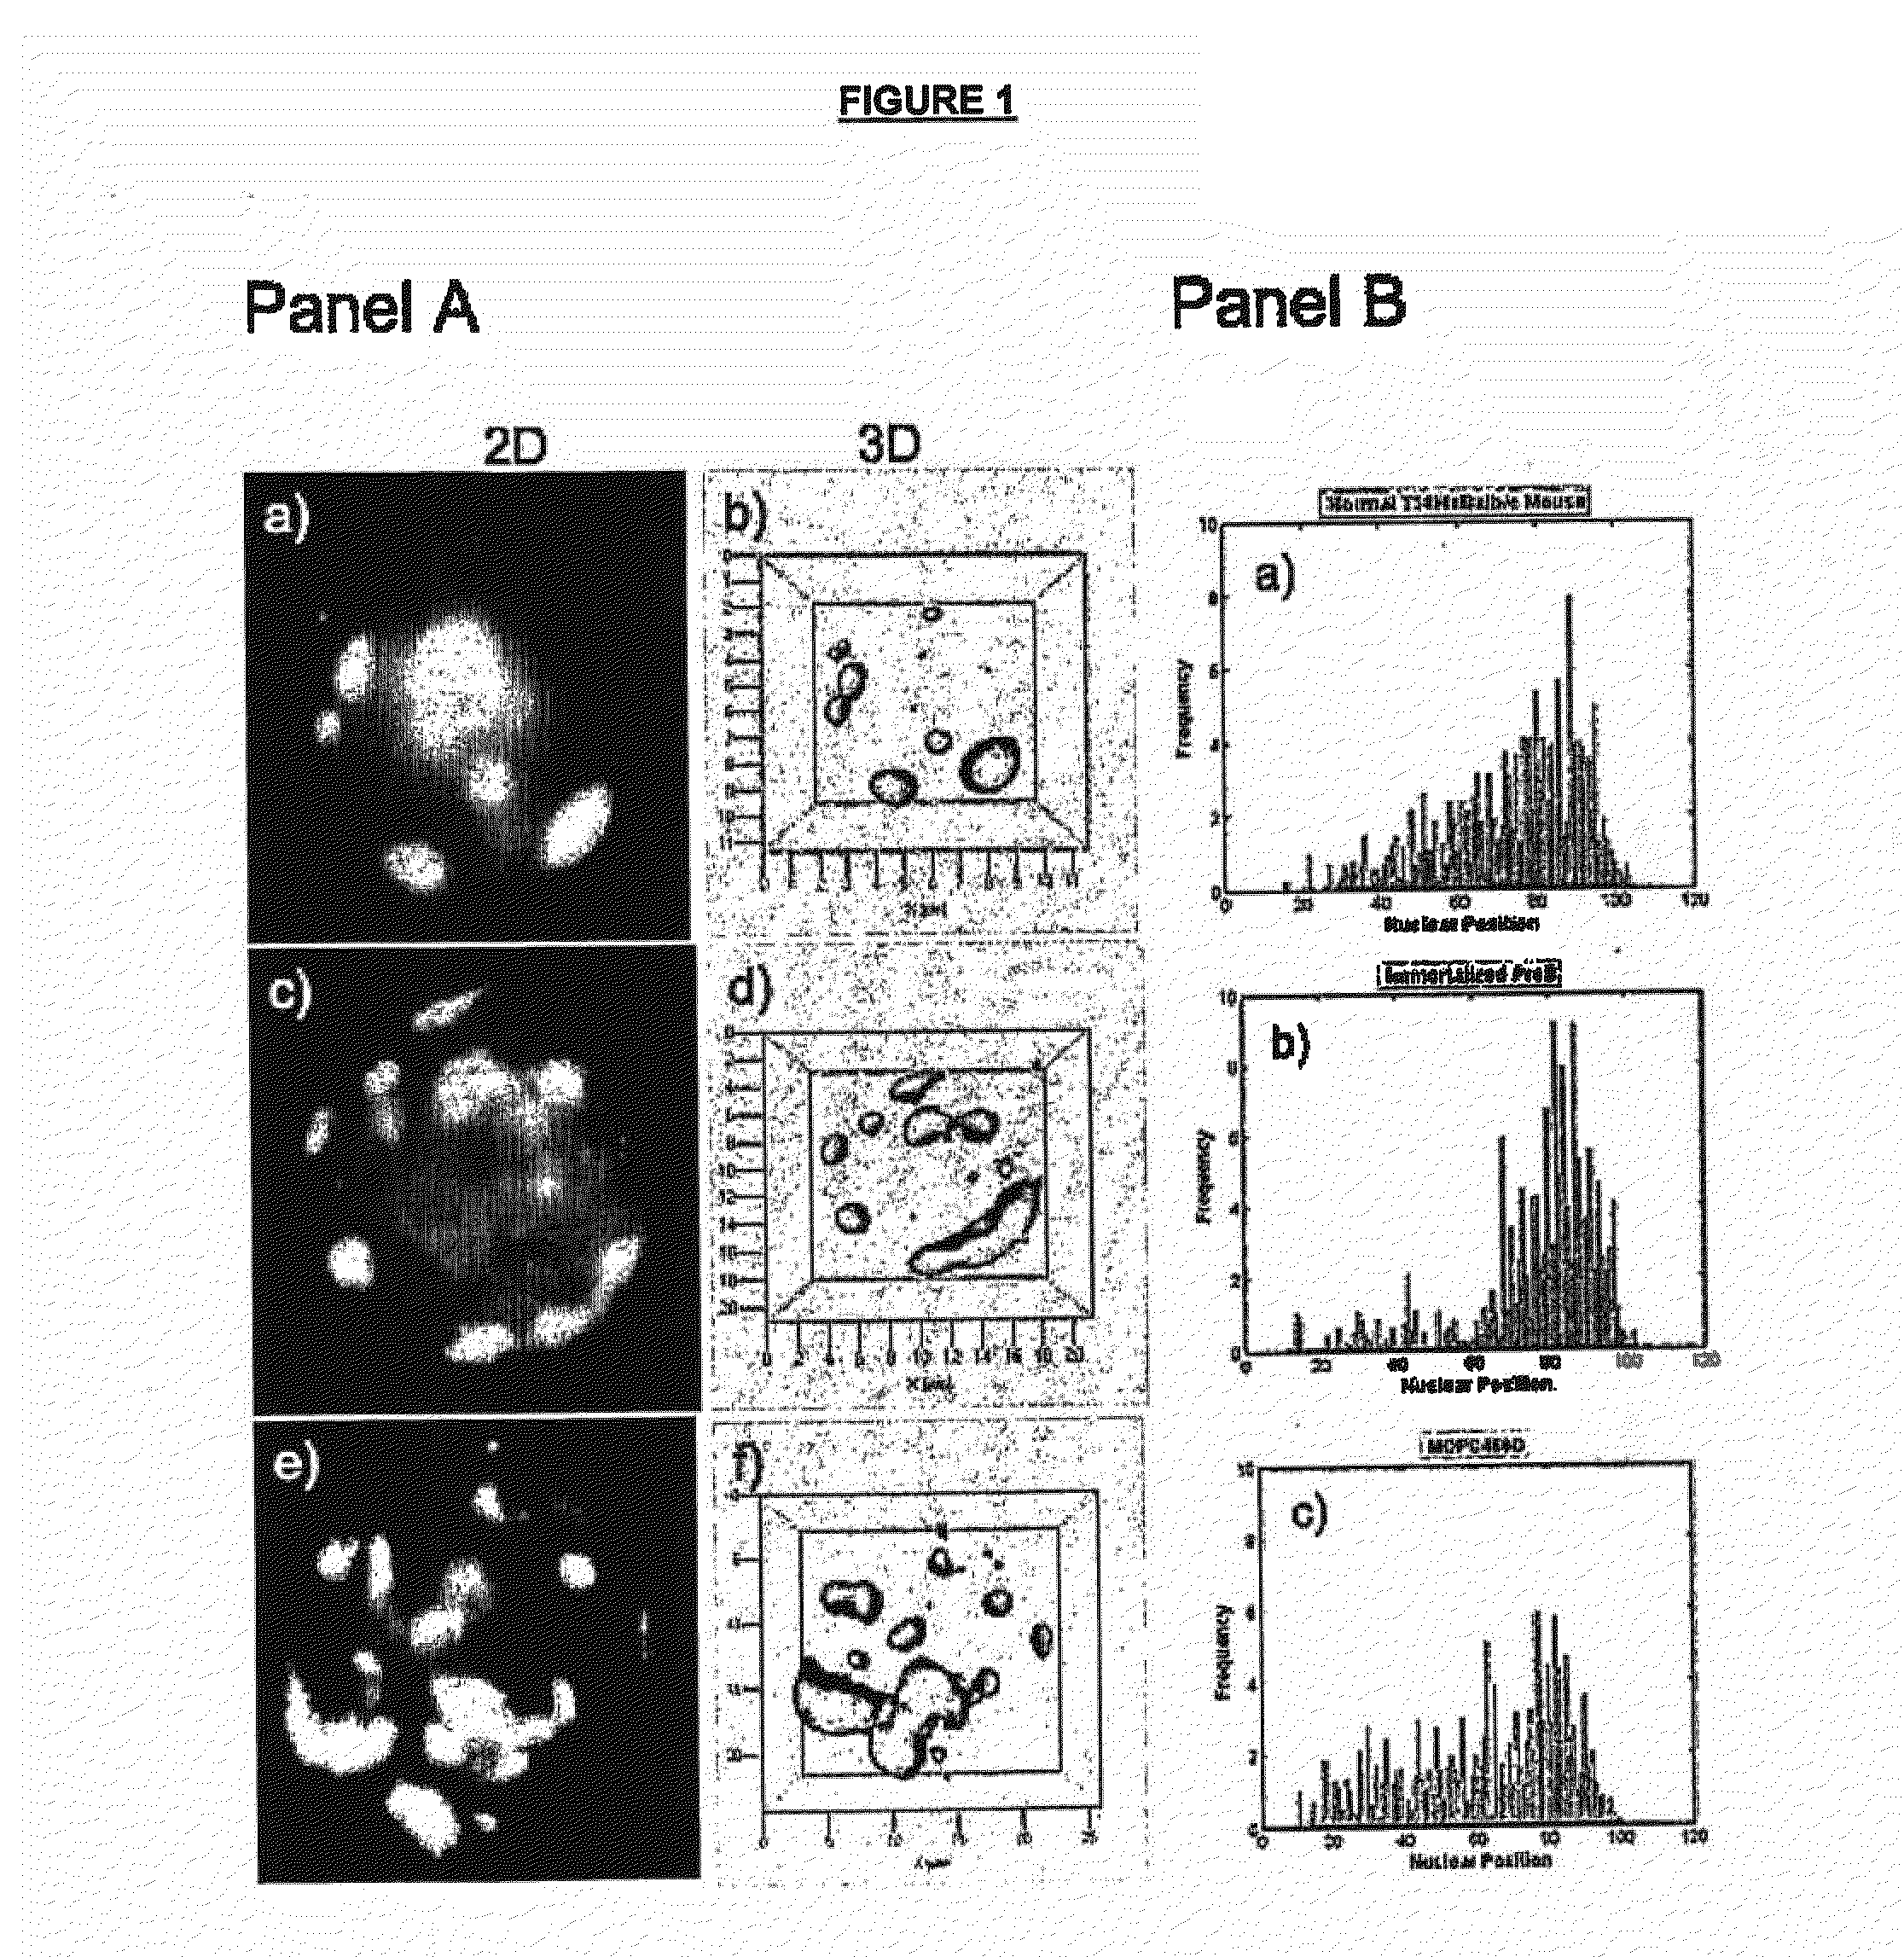 Methods of Detecting and Monitoring Cancer Using 3D Analysis of Centromeres